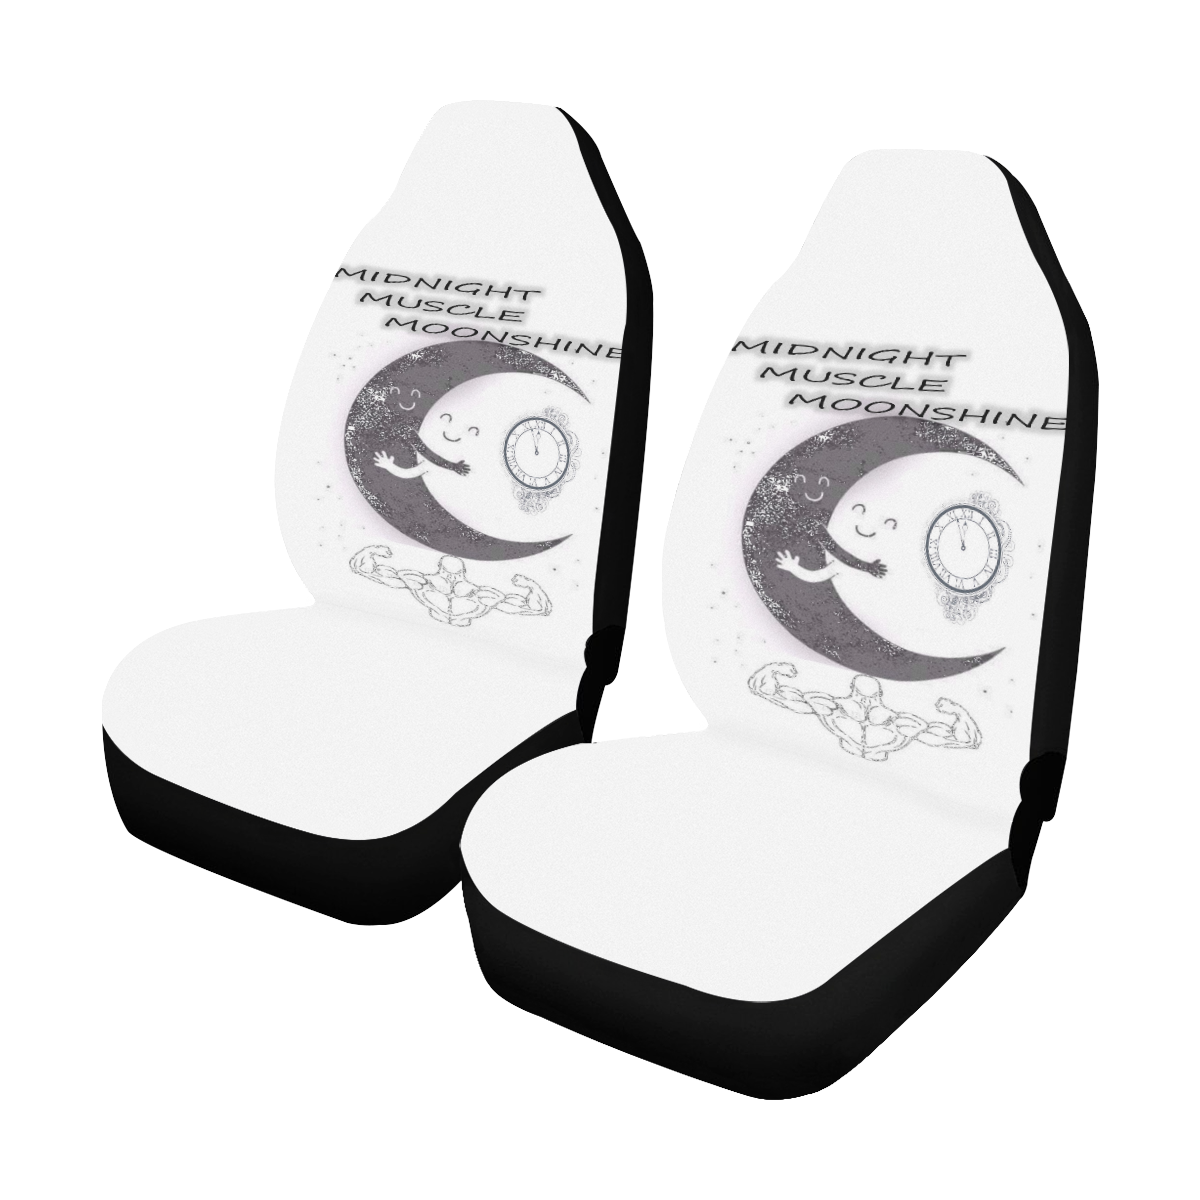 whyt3mshy Car Seat Covers (Set of 2)